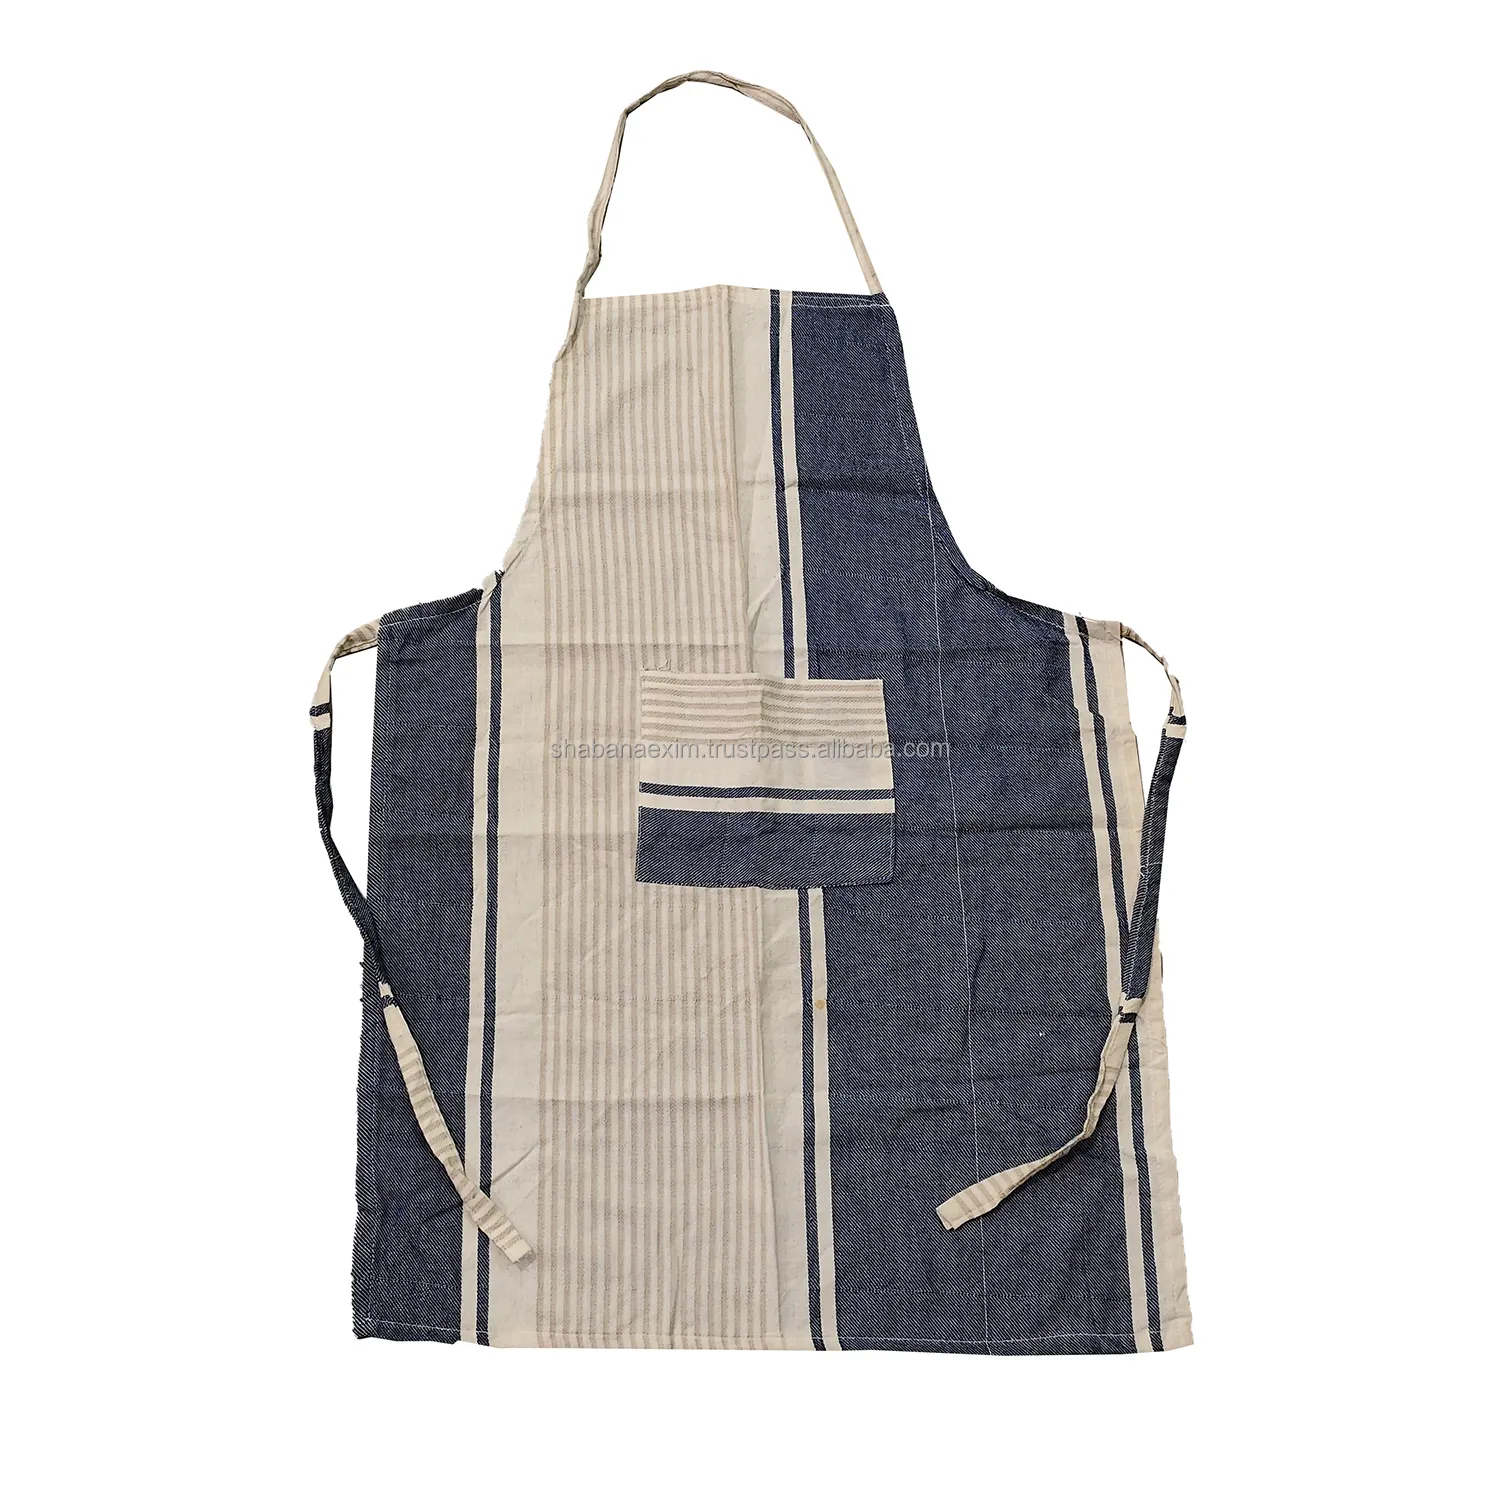 Eco-friendly Kids Cooking Apron Woven 100% Cotton Kitchen Aprons for Pottery, Cooking Gardening Apron from India